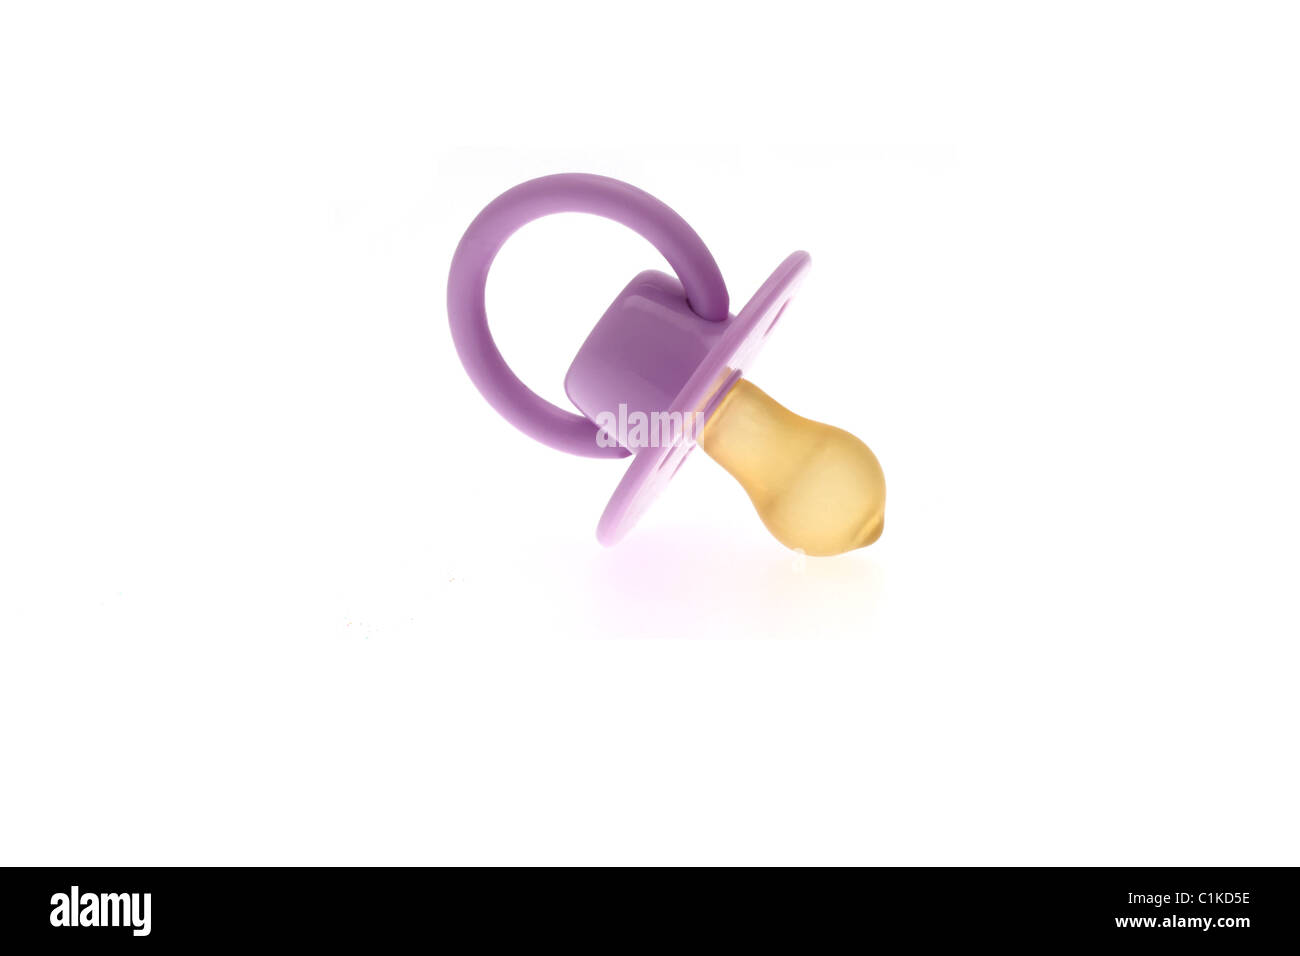 High key image of an infants purple dummy or pacifier taken against a white background. Stock Photo